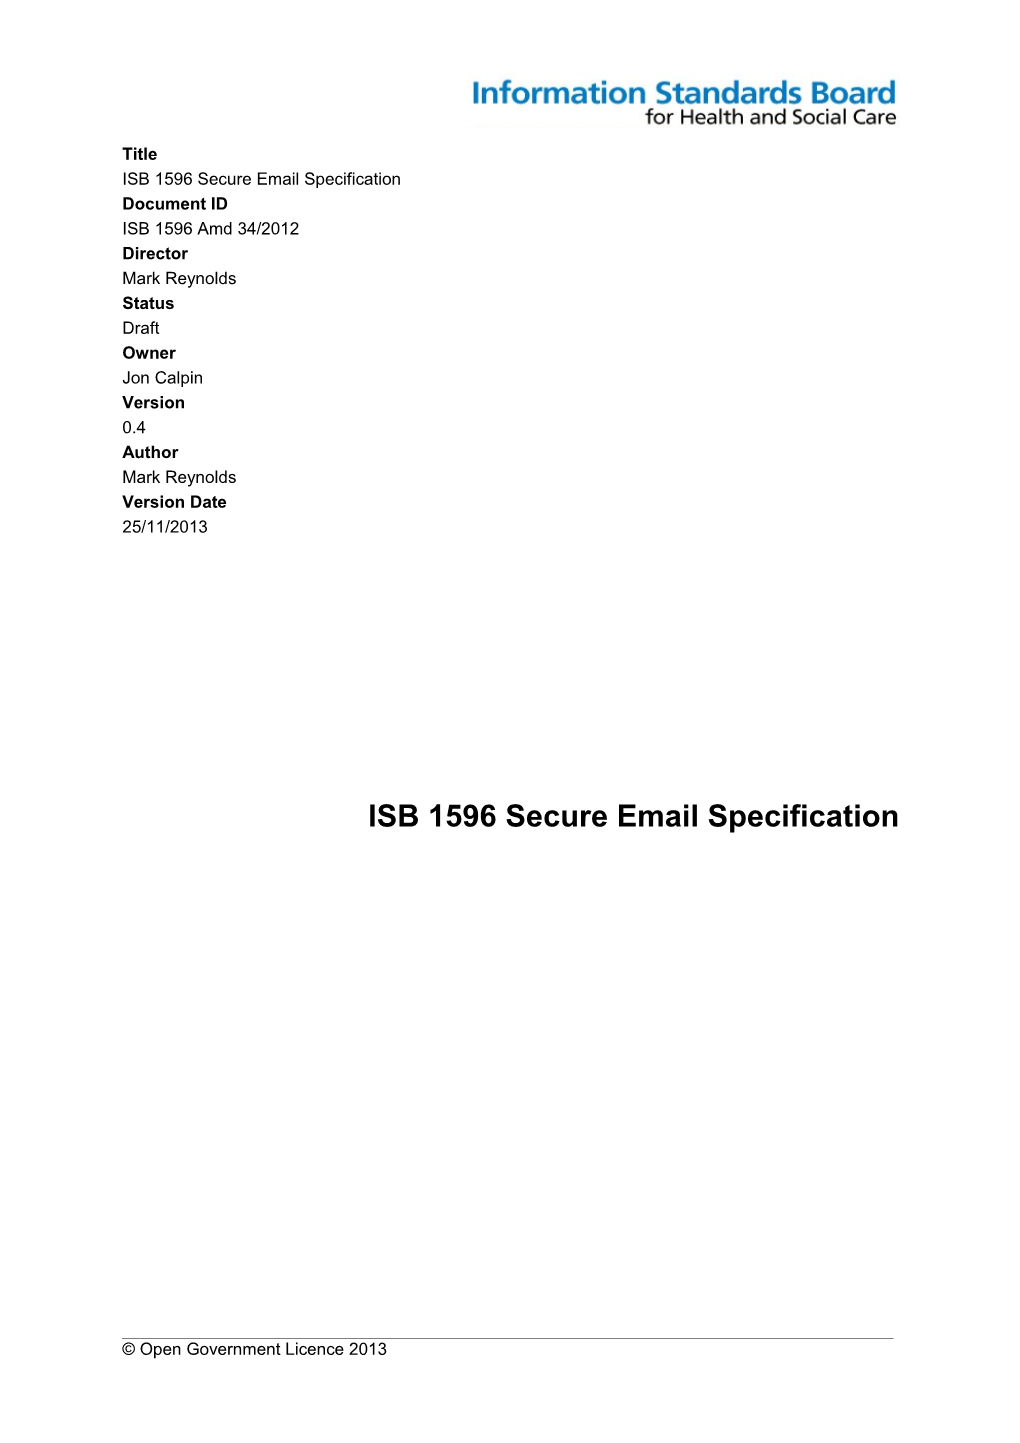 ISB 1596 Secure Email Specification